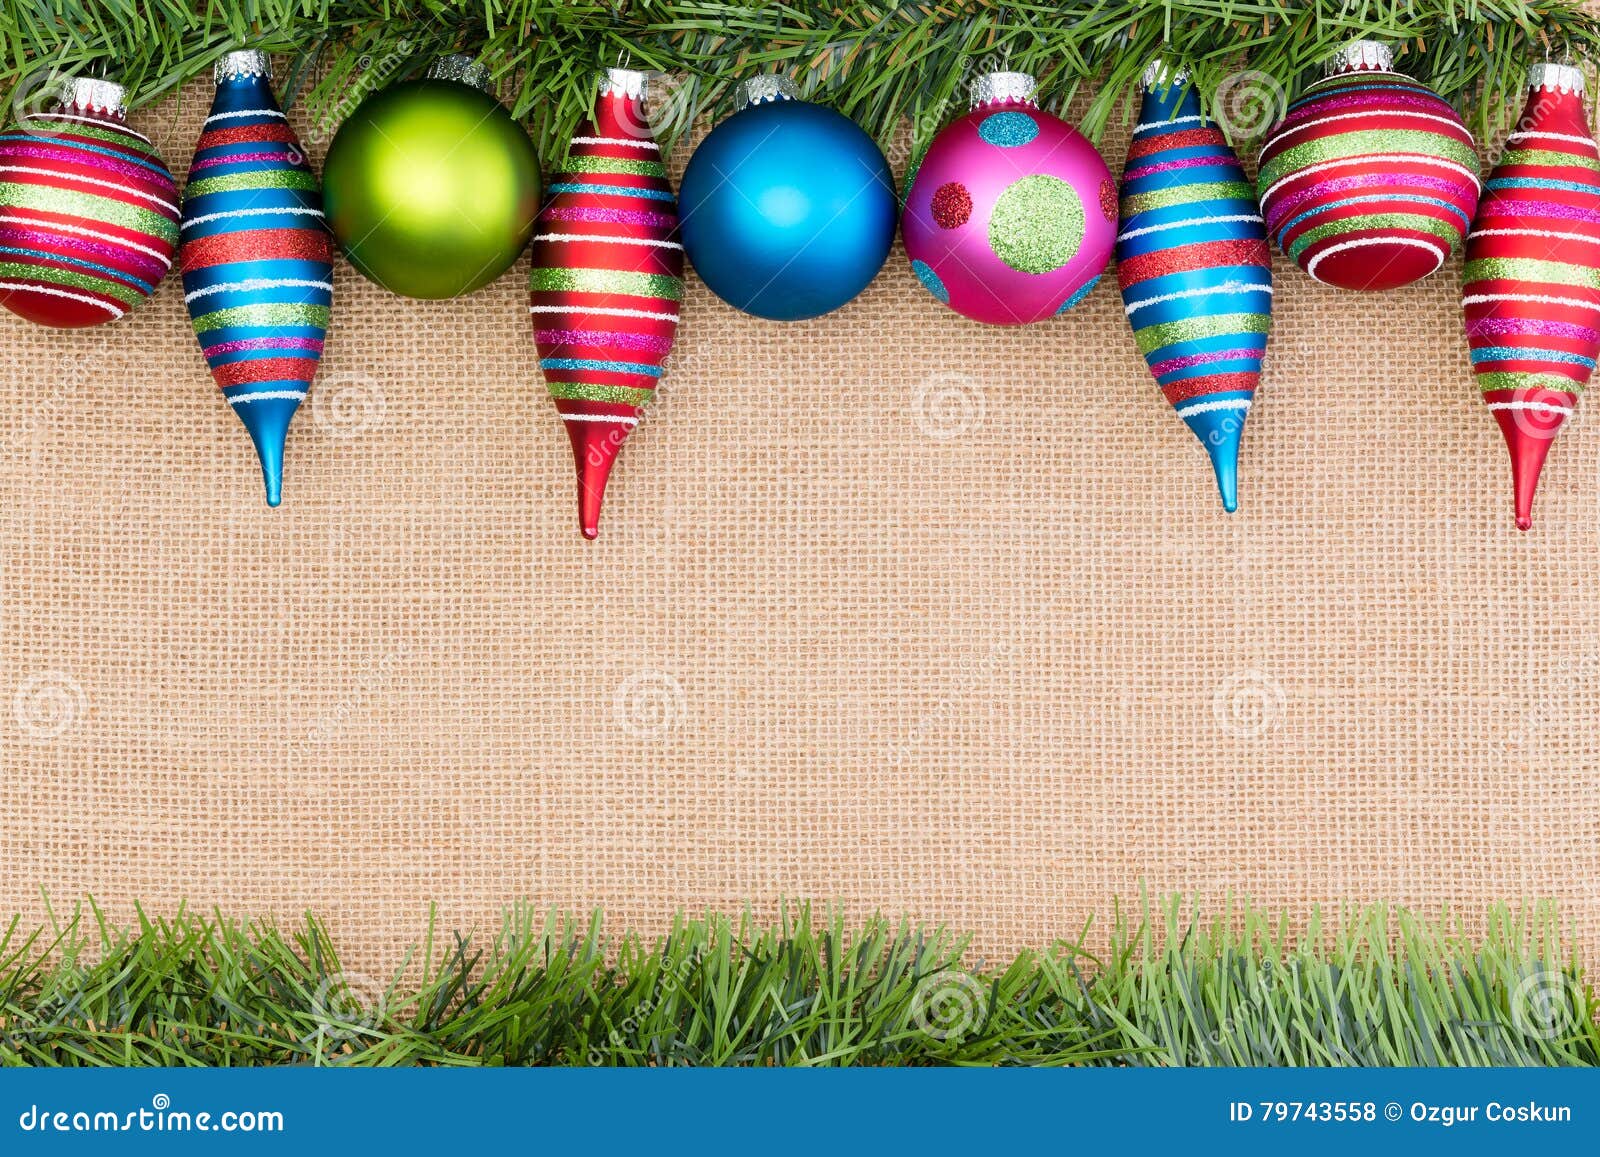 Brightly Colored Border of Christmas Ornaments Stock Photo - Image of ...